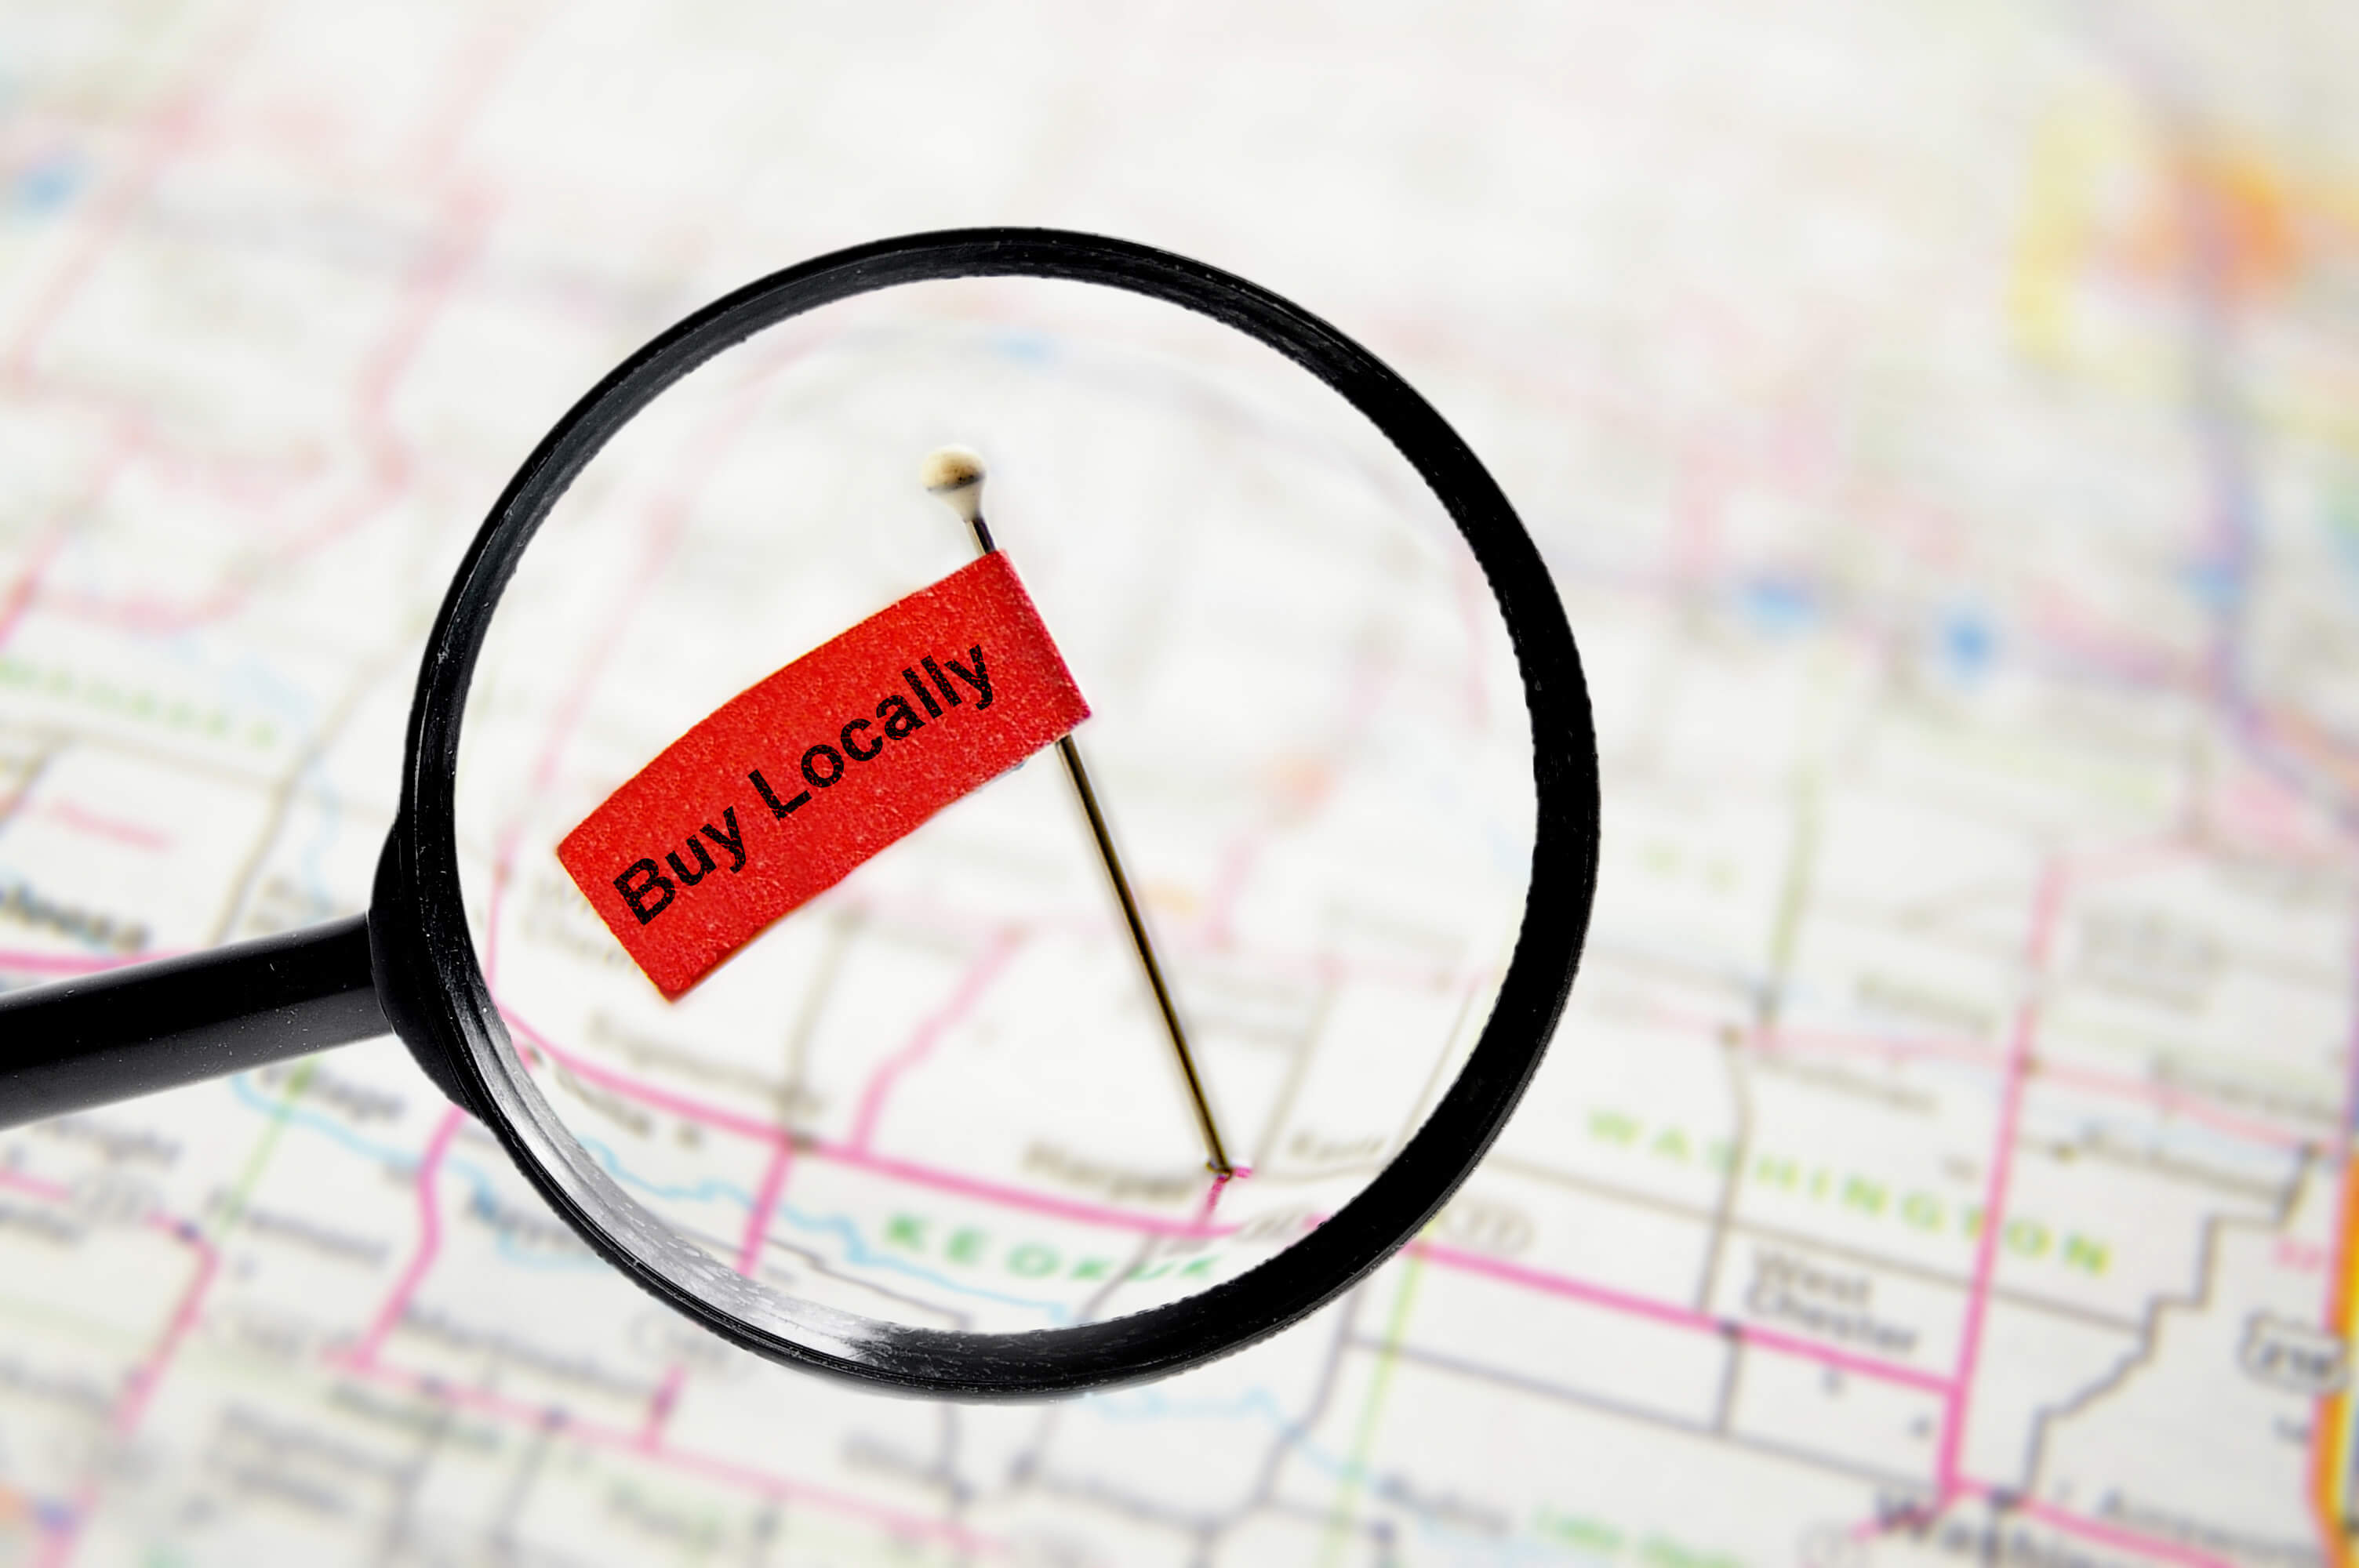 Buy Locally pin on map under magnifying glass